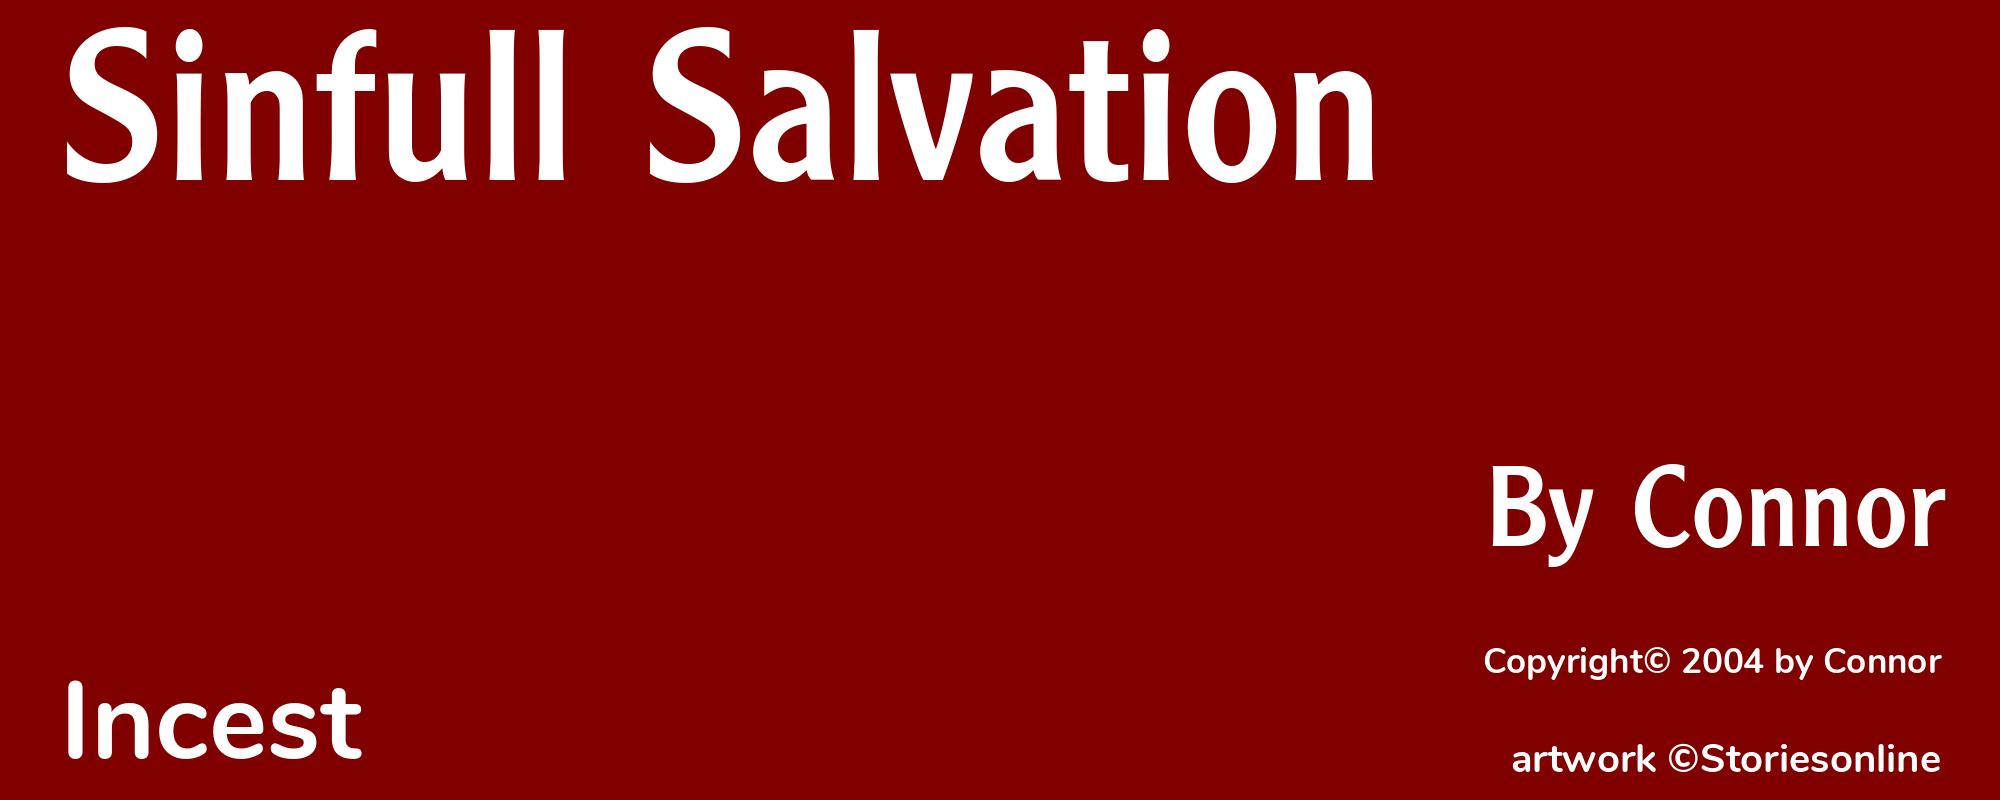 Sinfull Salvation - Cover